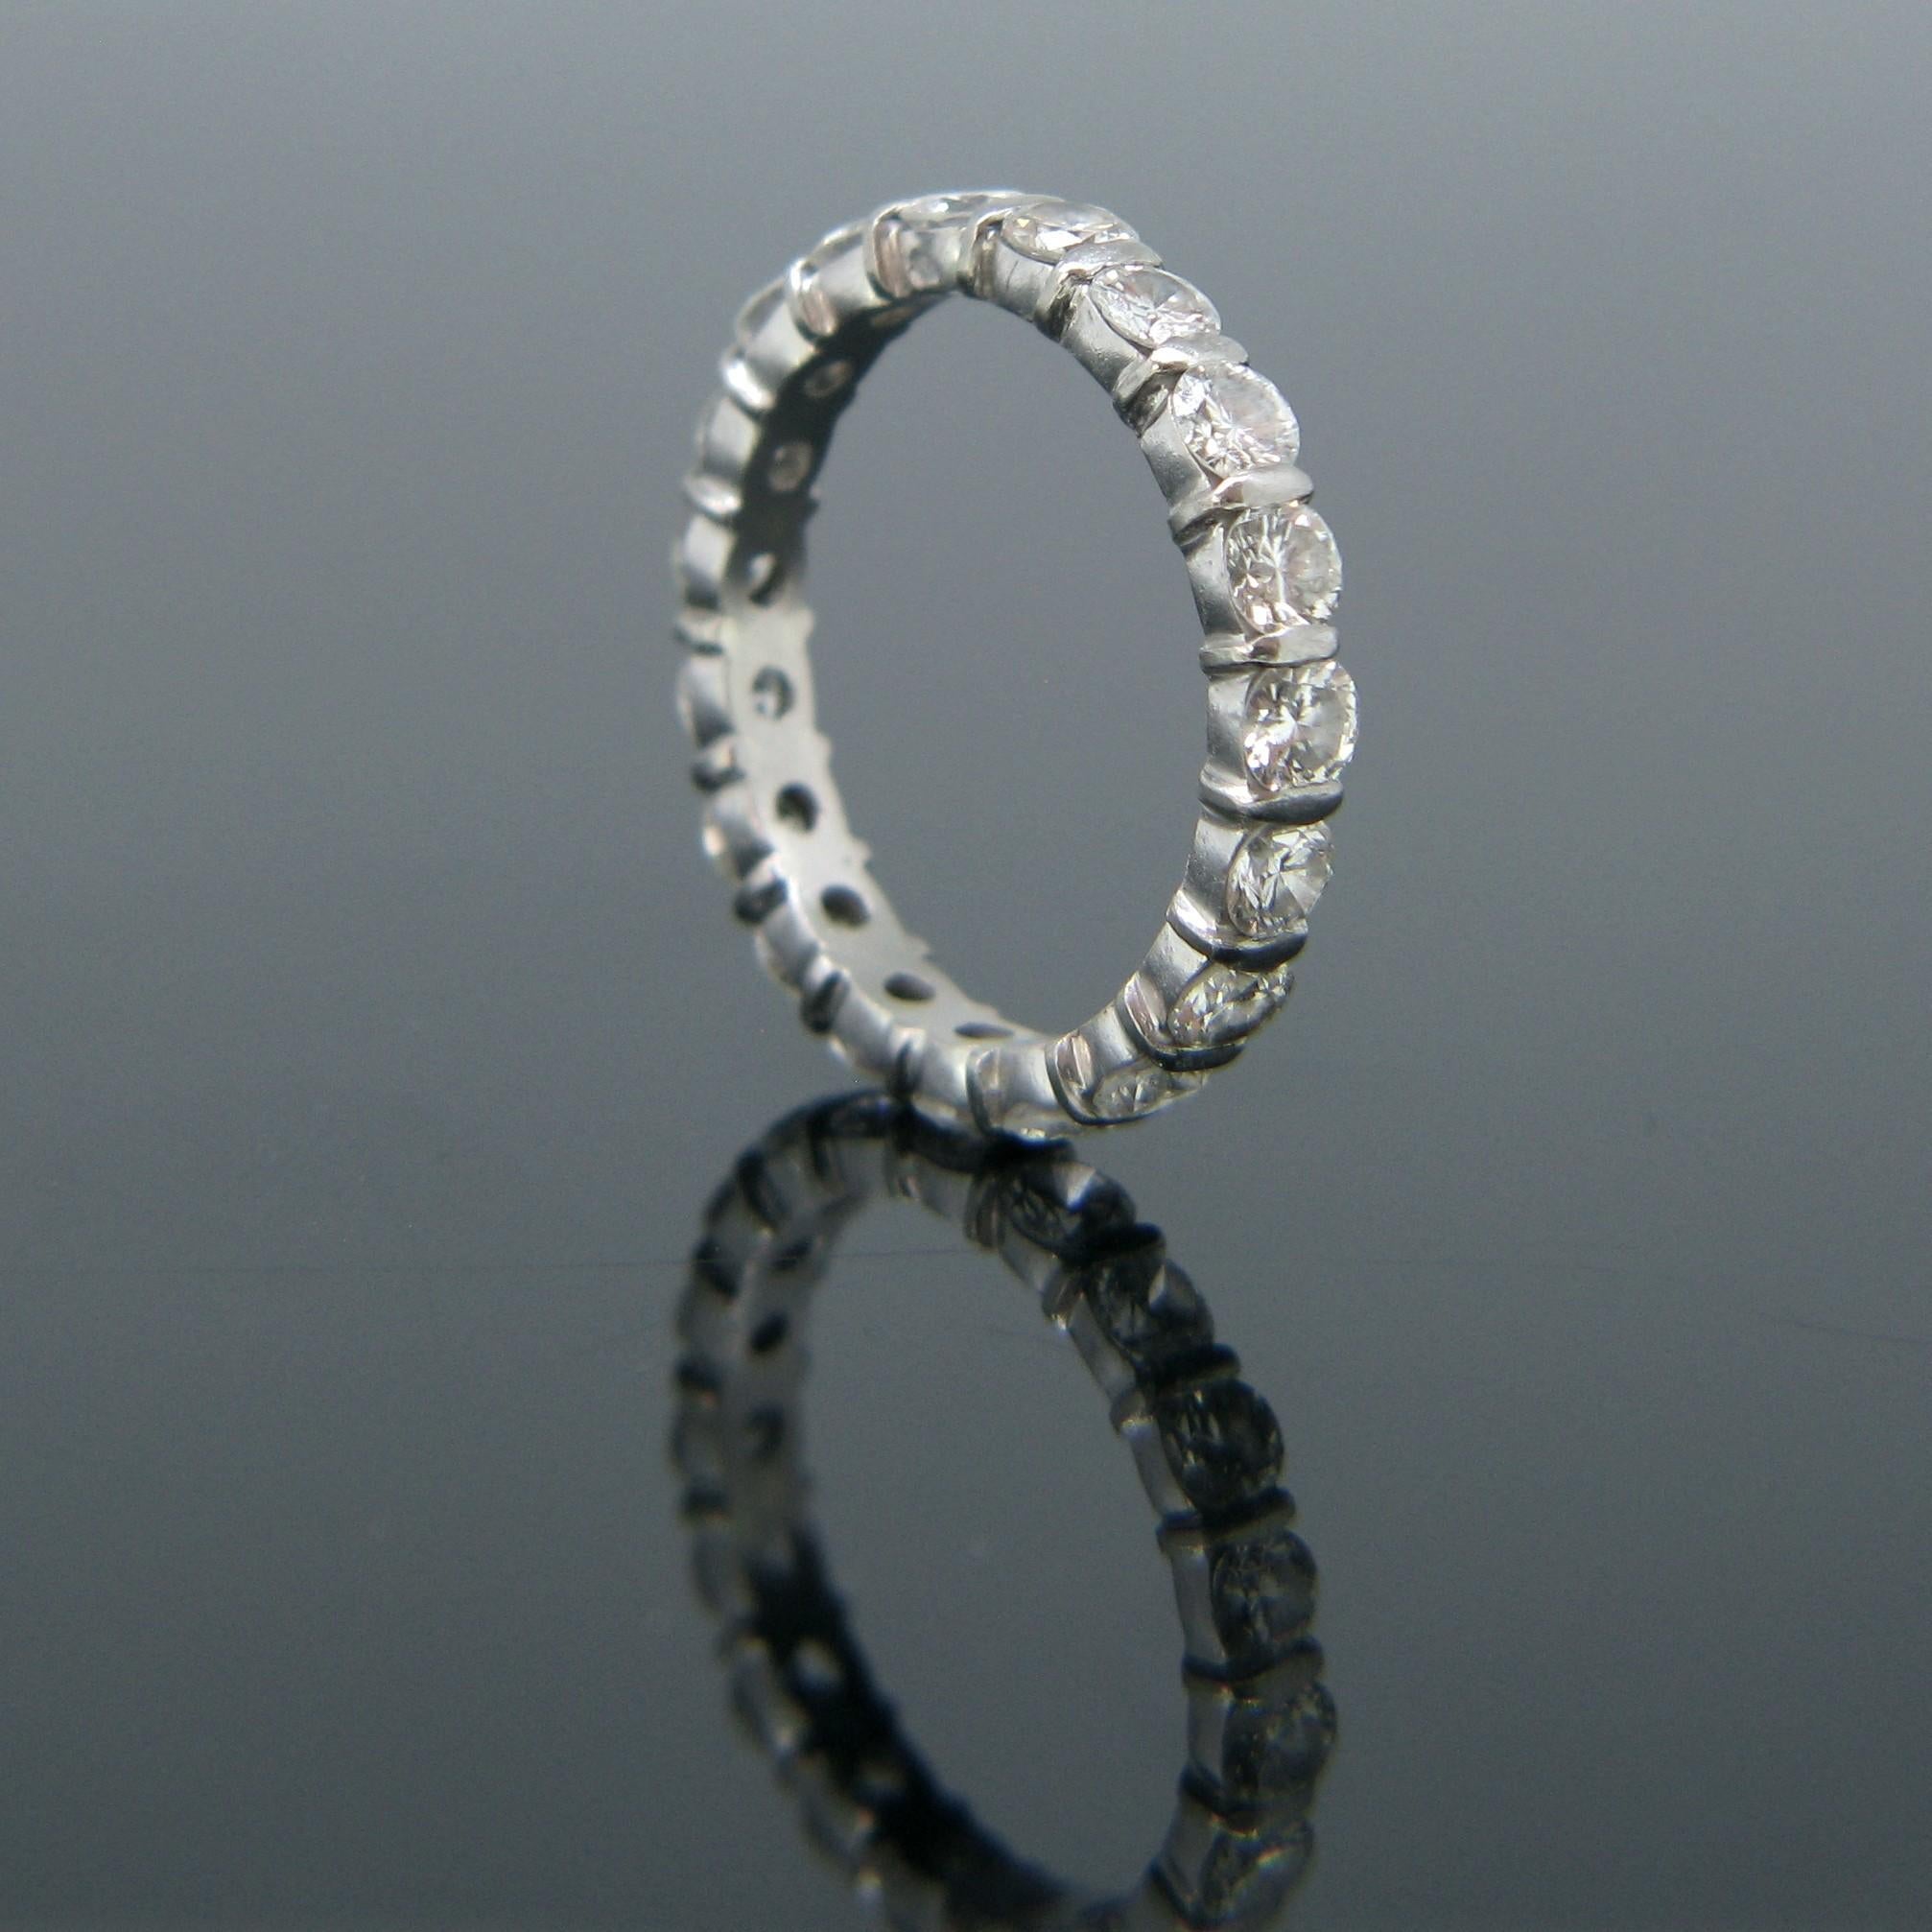 Weight:	3.30gr

Metal:		18kt White Gold

Stones:	19 Diamonds
•	Cut:	Round Cut  
•	Carat Weight:	2.20ct approx. (total) 
•	Colour:	I / J
•	Clarity:	VS/SI

Condition:	Very Good

Hallmarks:	French – Eagle’s head 

Comments:	This lovely eternity ring is